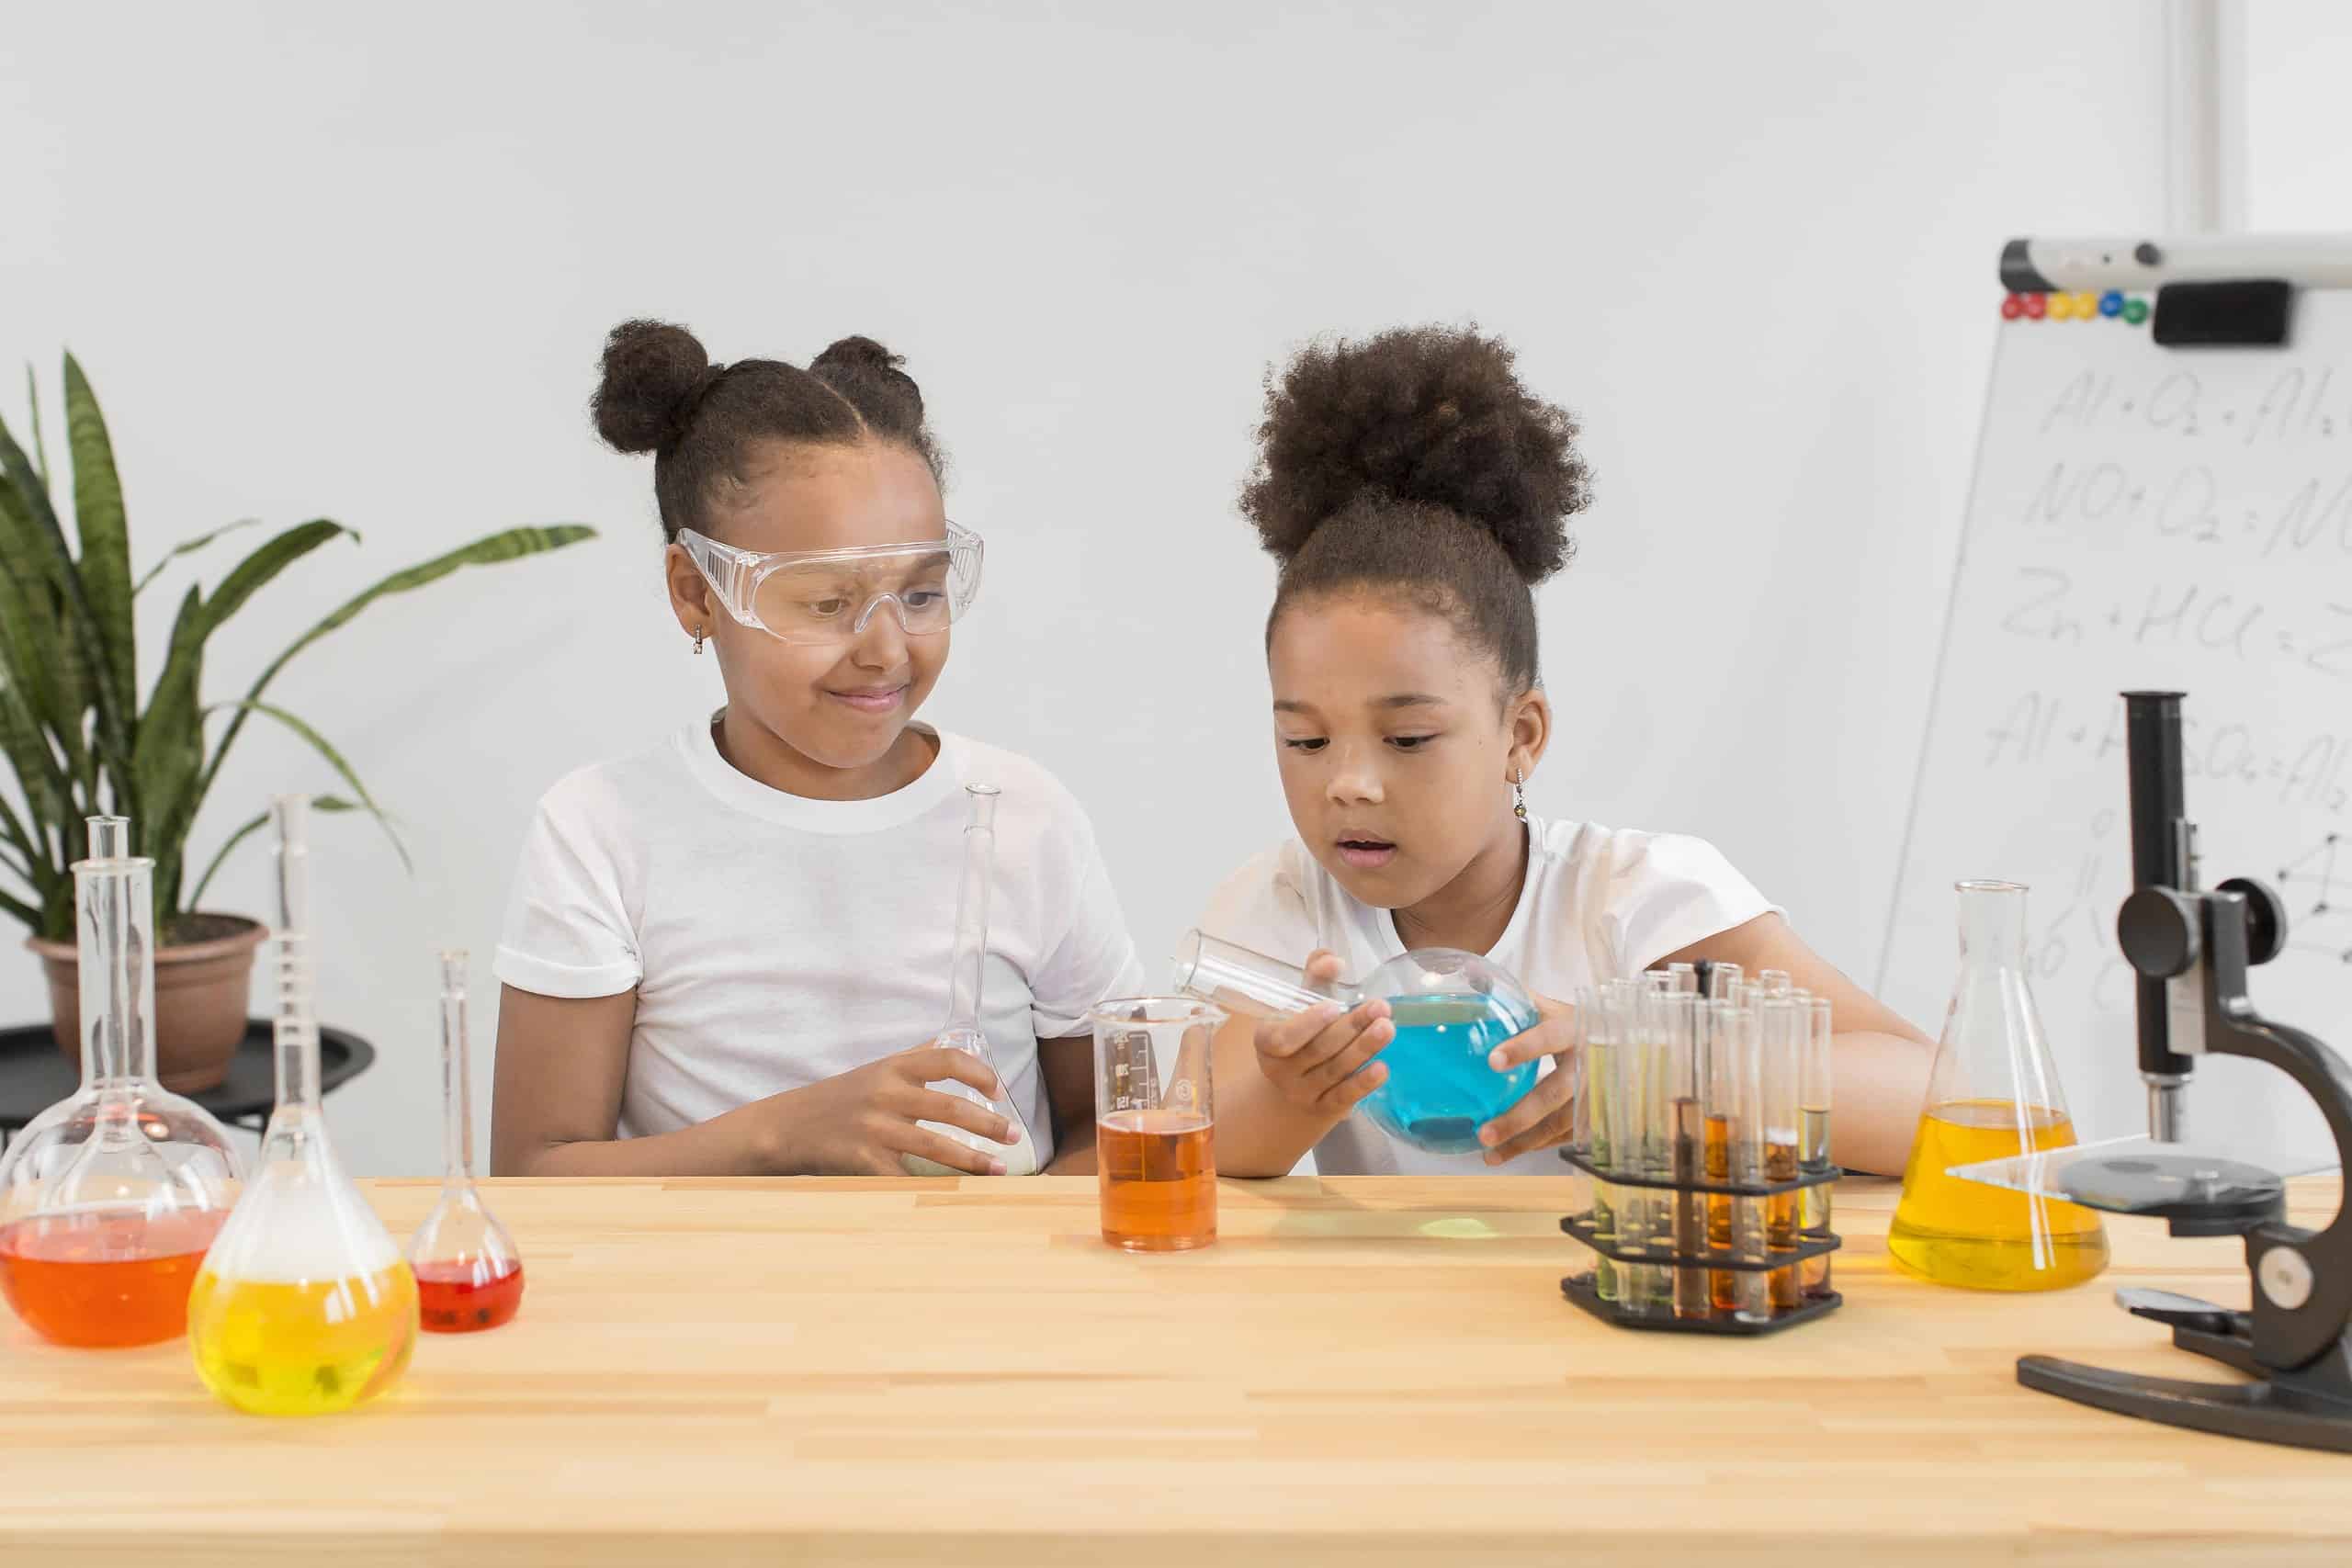 front-view-girls-experimenting-chemistry-home